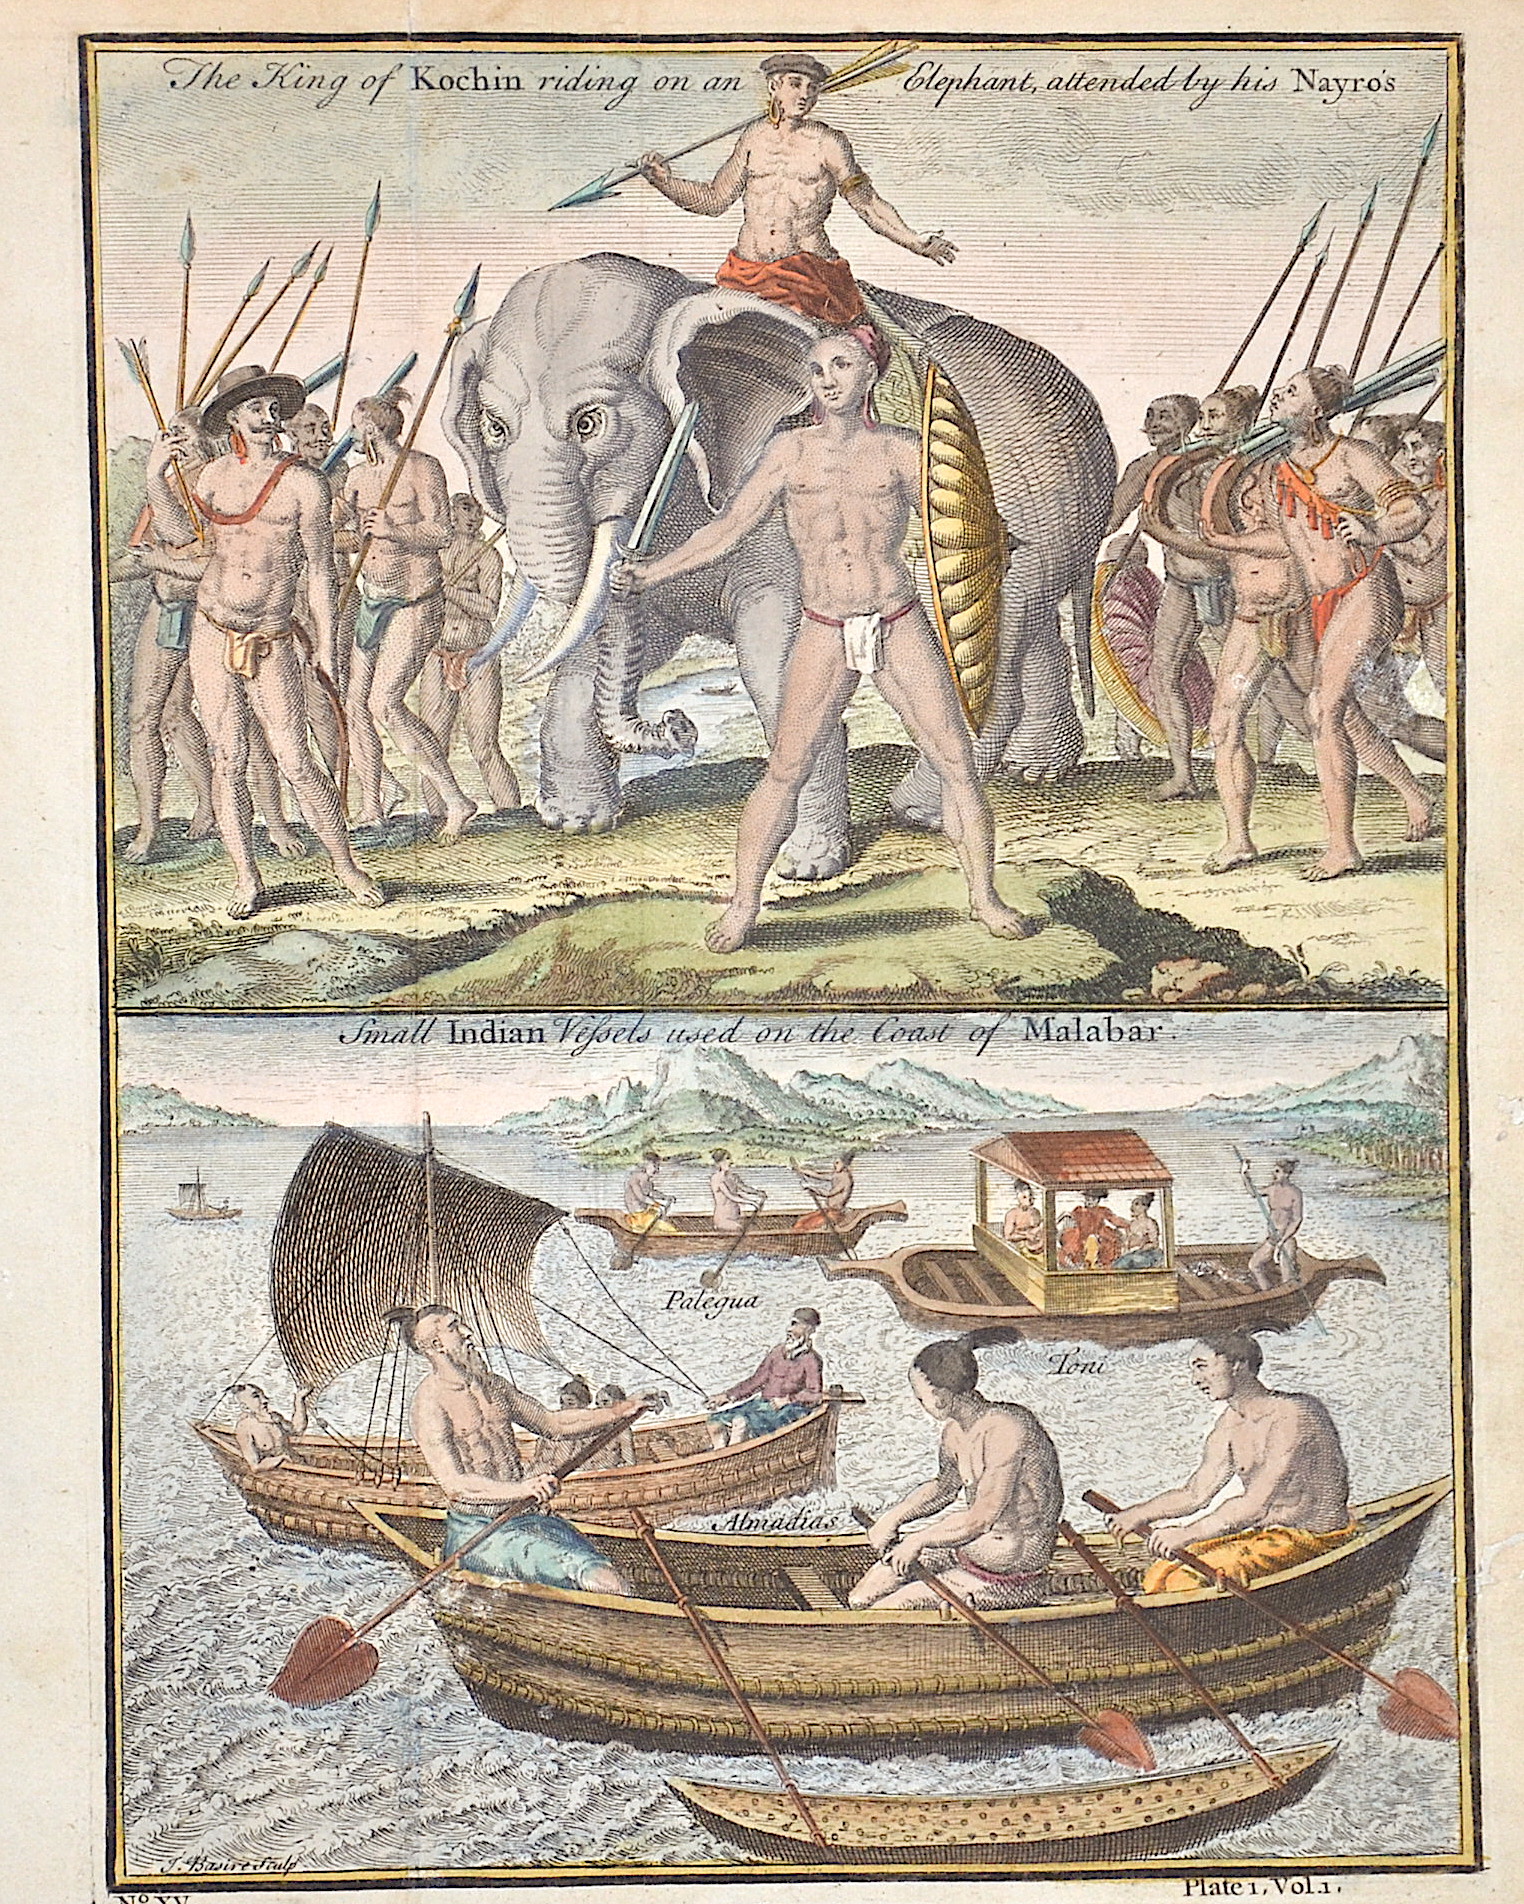 Anonymus  The King of Kochin riding on an Elephant, attended by his Nayro’s / Small Indian Vessets used on the Coast of Malabar.